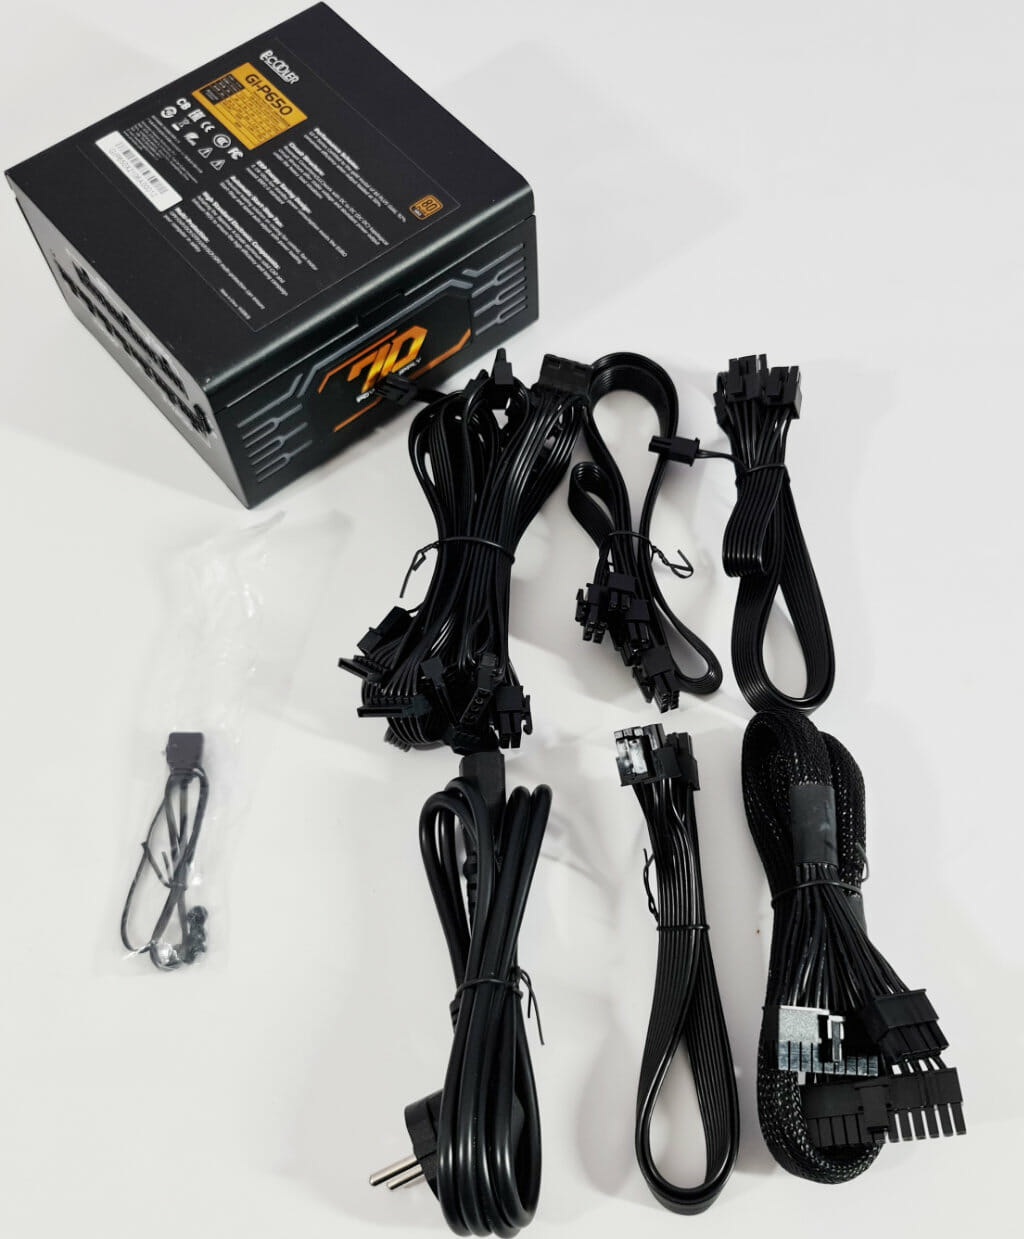 PCCOOLER GI P 650W 7D RGB PSU REVIEW psu and cables